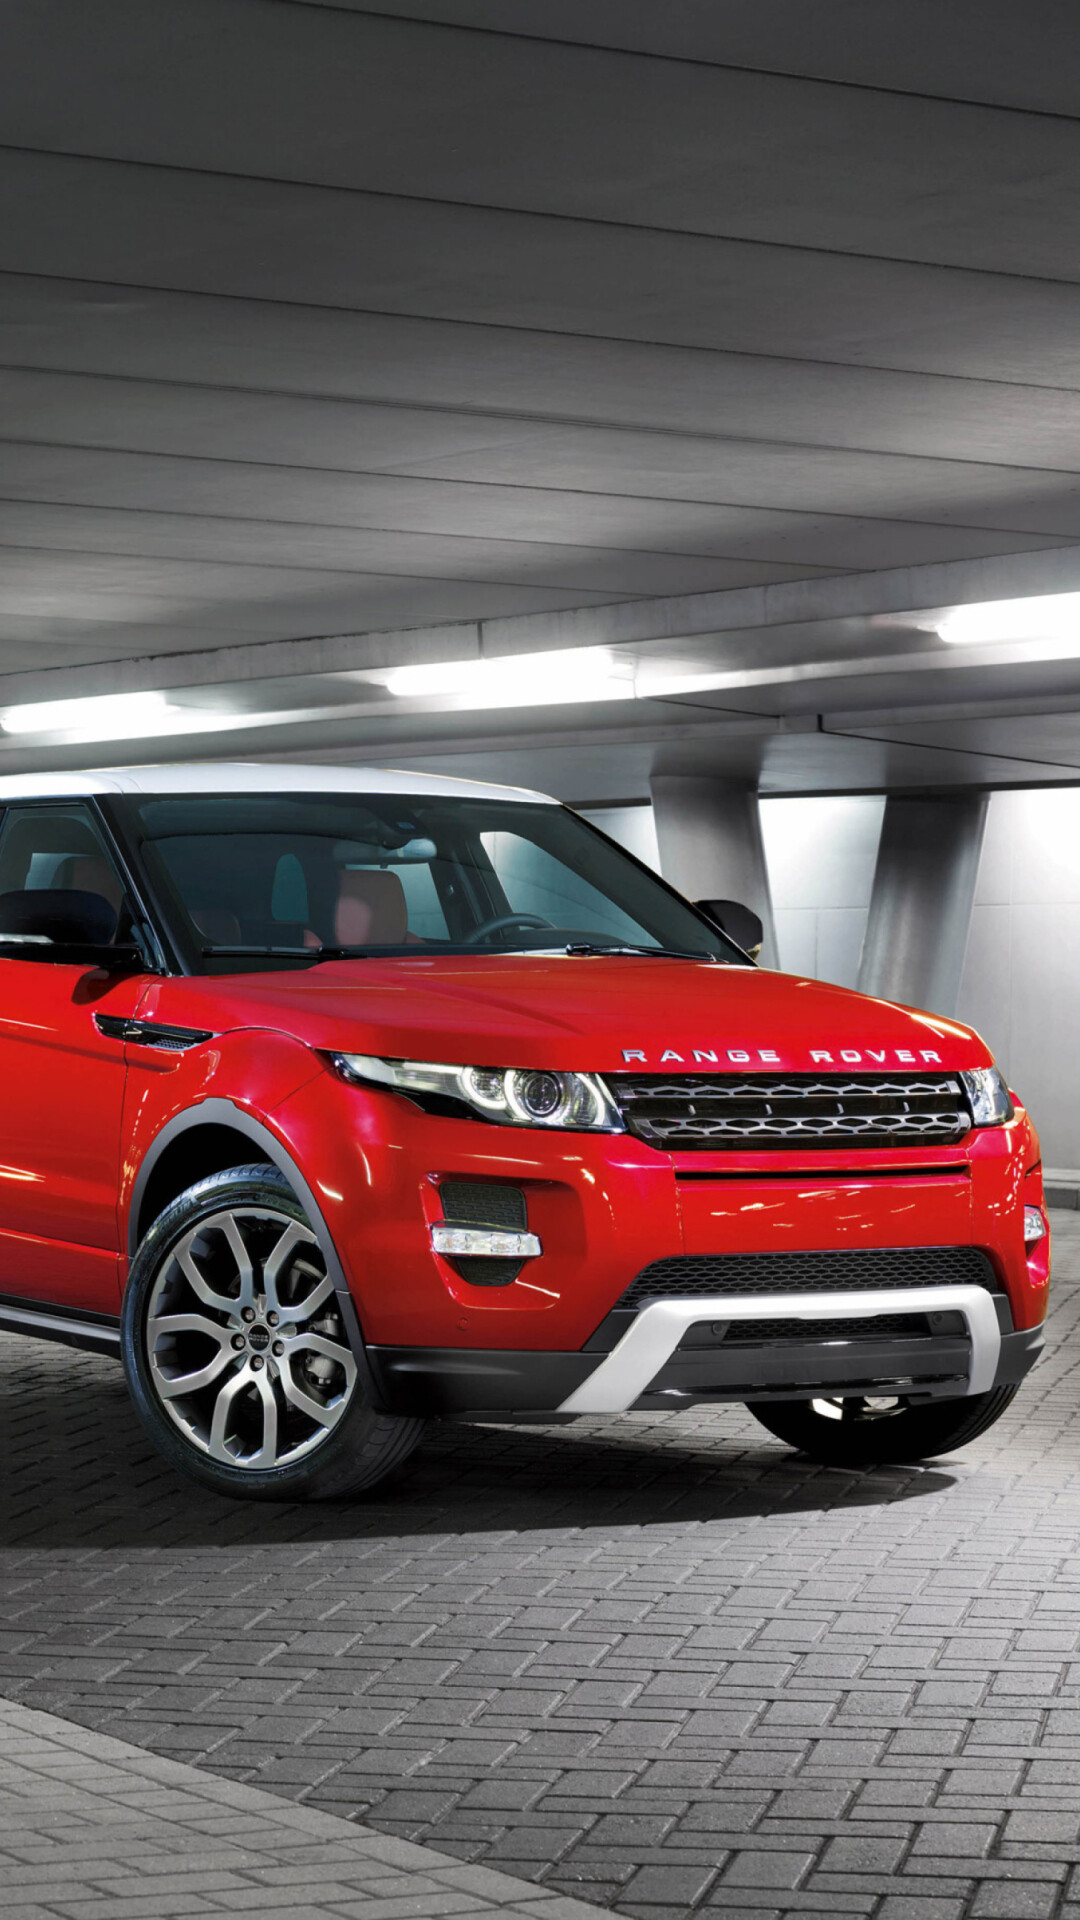 Range Rover: A marque and sub-brand of Jaguar Land Rover. 1080x1920 Full HD Wallpaper.